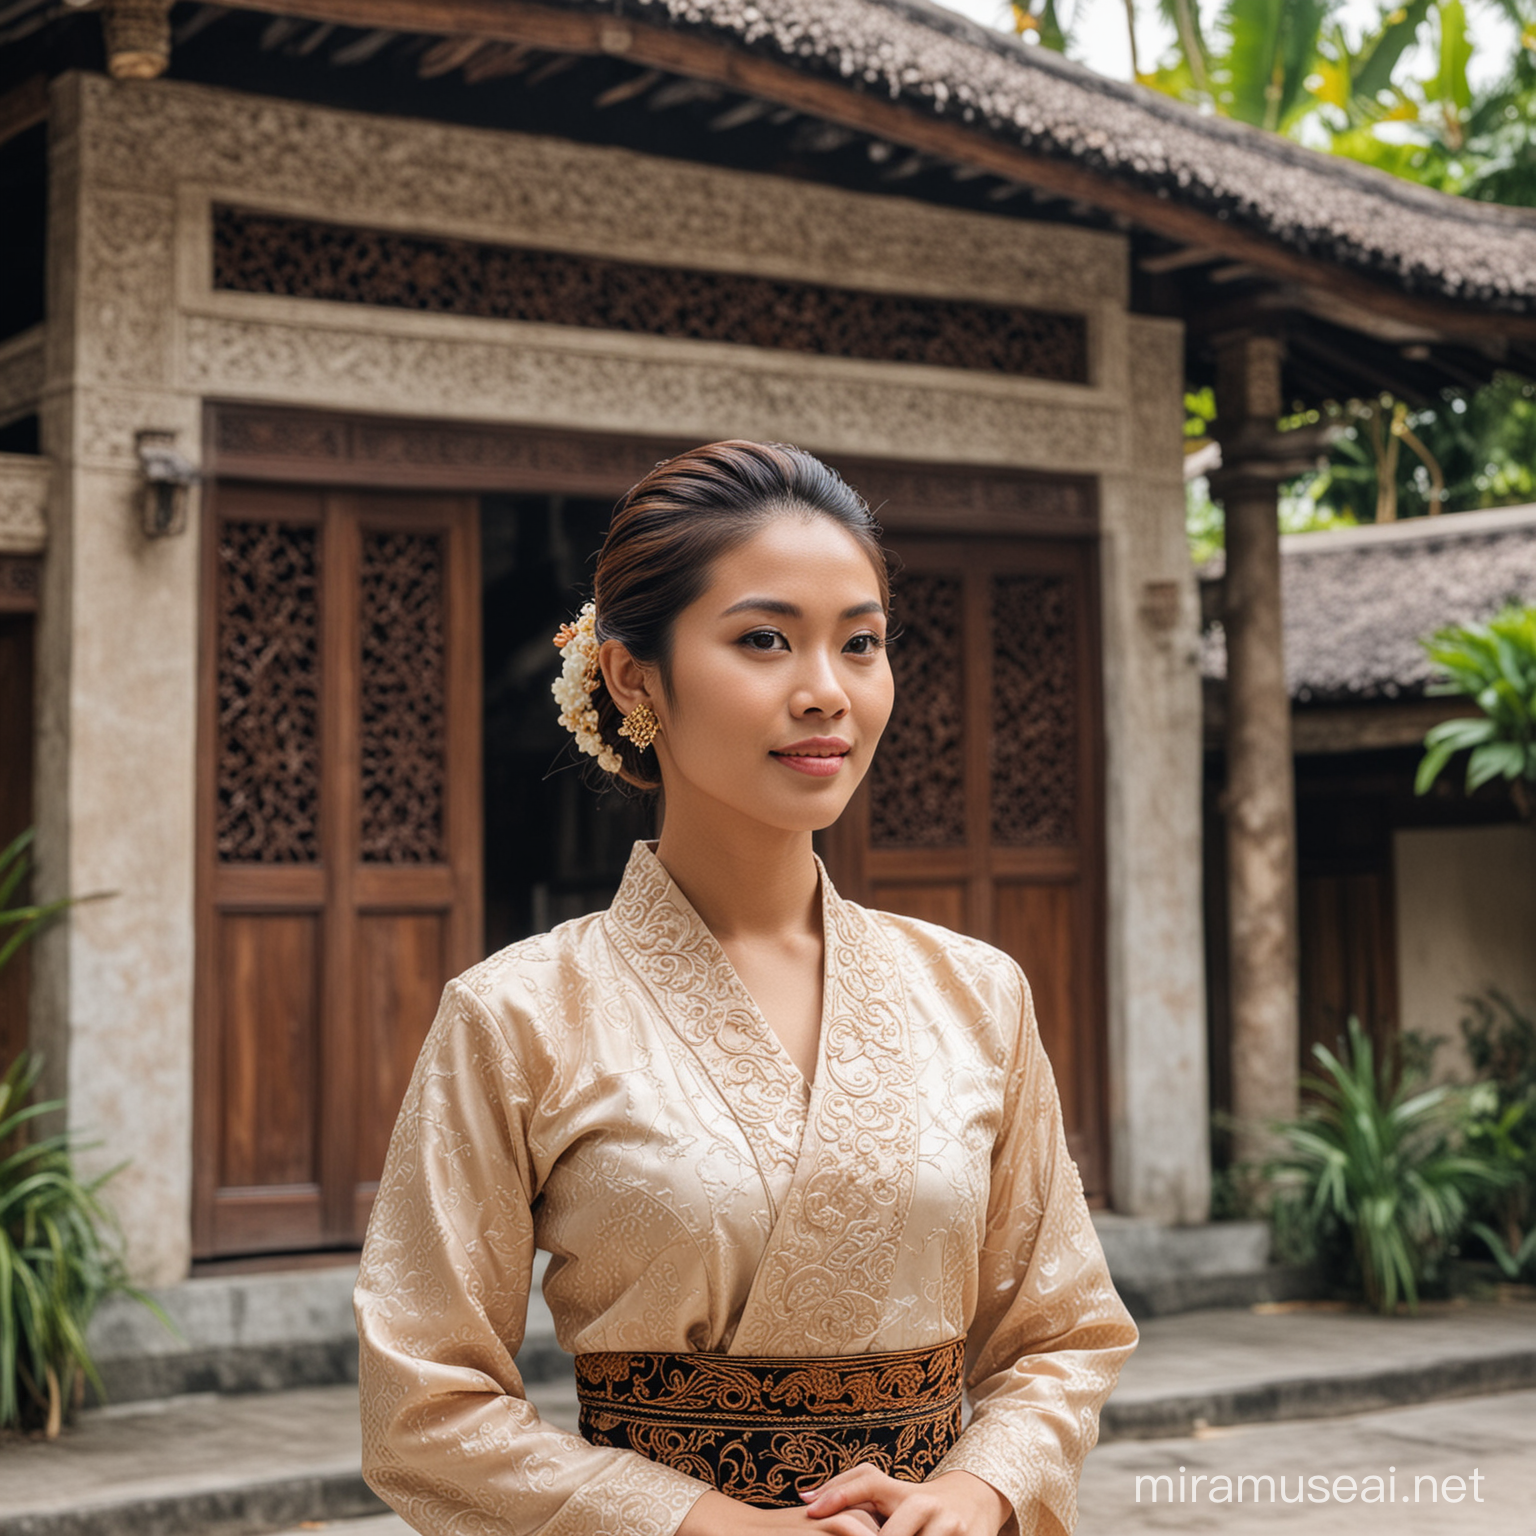 Asian woman, hair in a bun, Balinese kebaya, standing in front of a traditional Balinese house